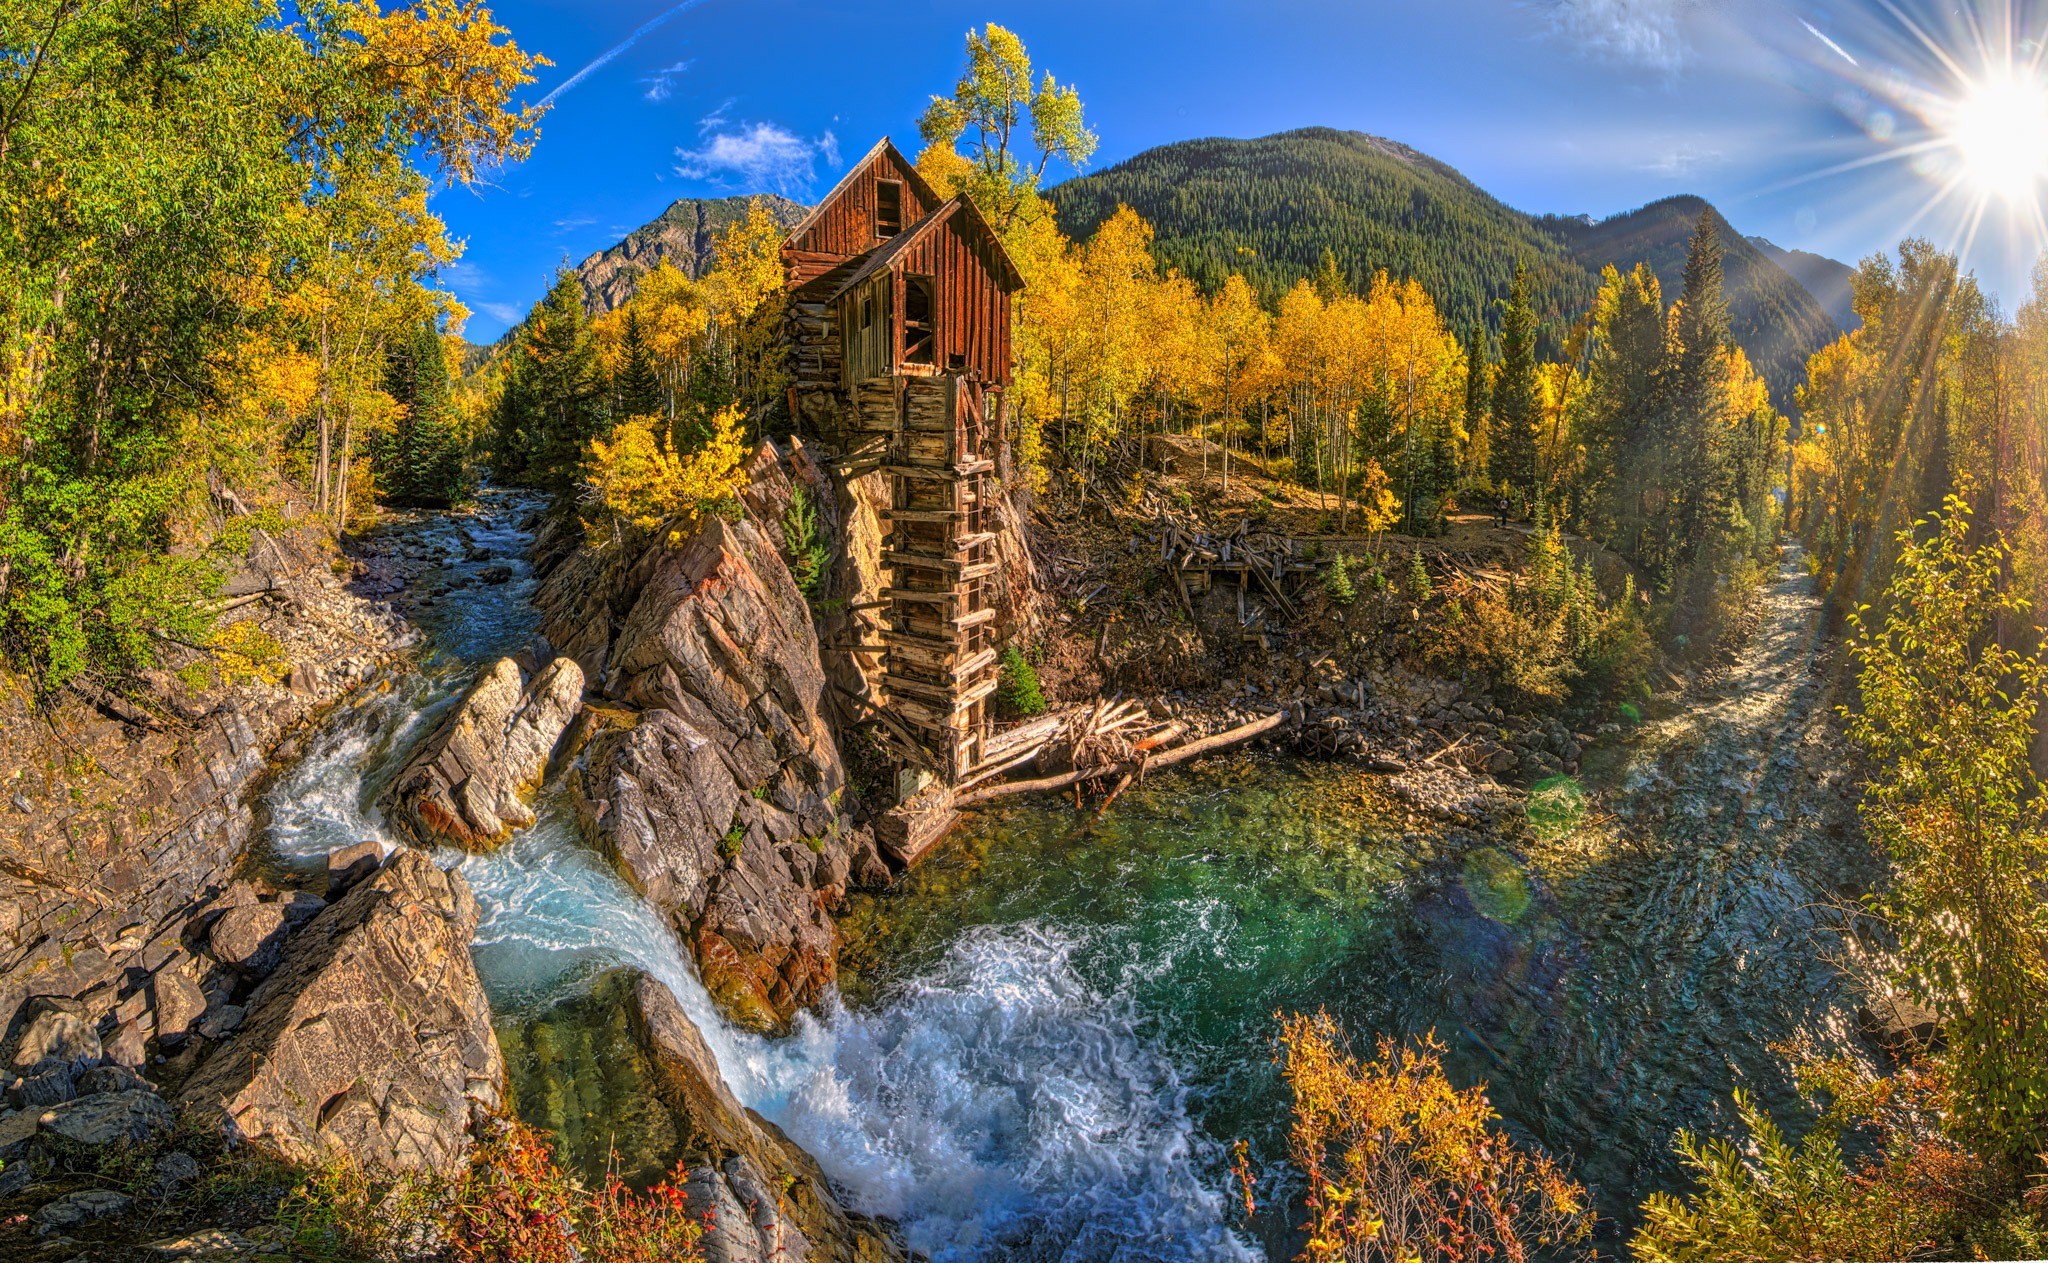 A panoramic view of the old Crystal Powerhouse along the Crystal River near Marble, Colorado.